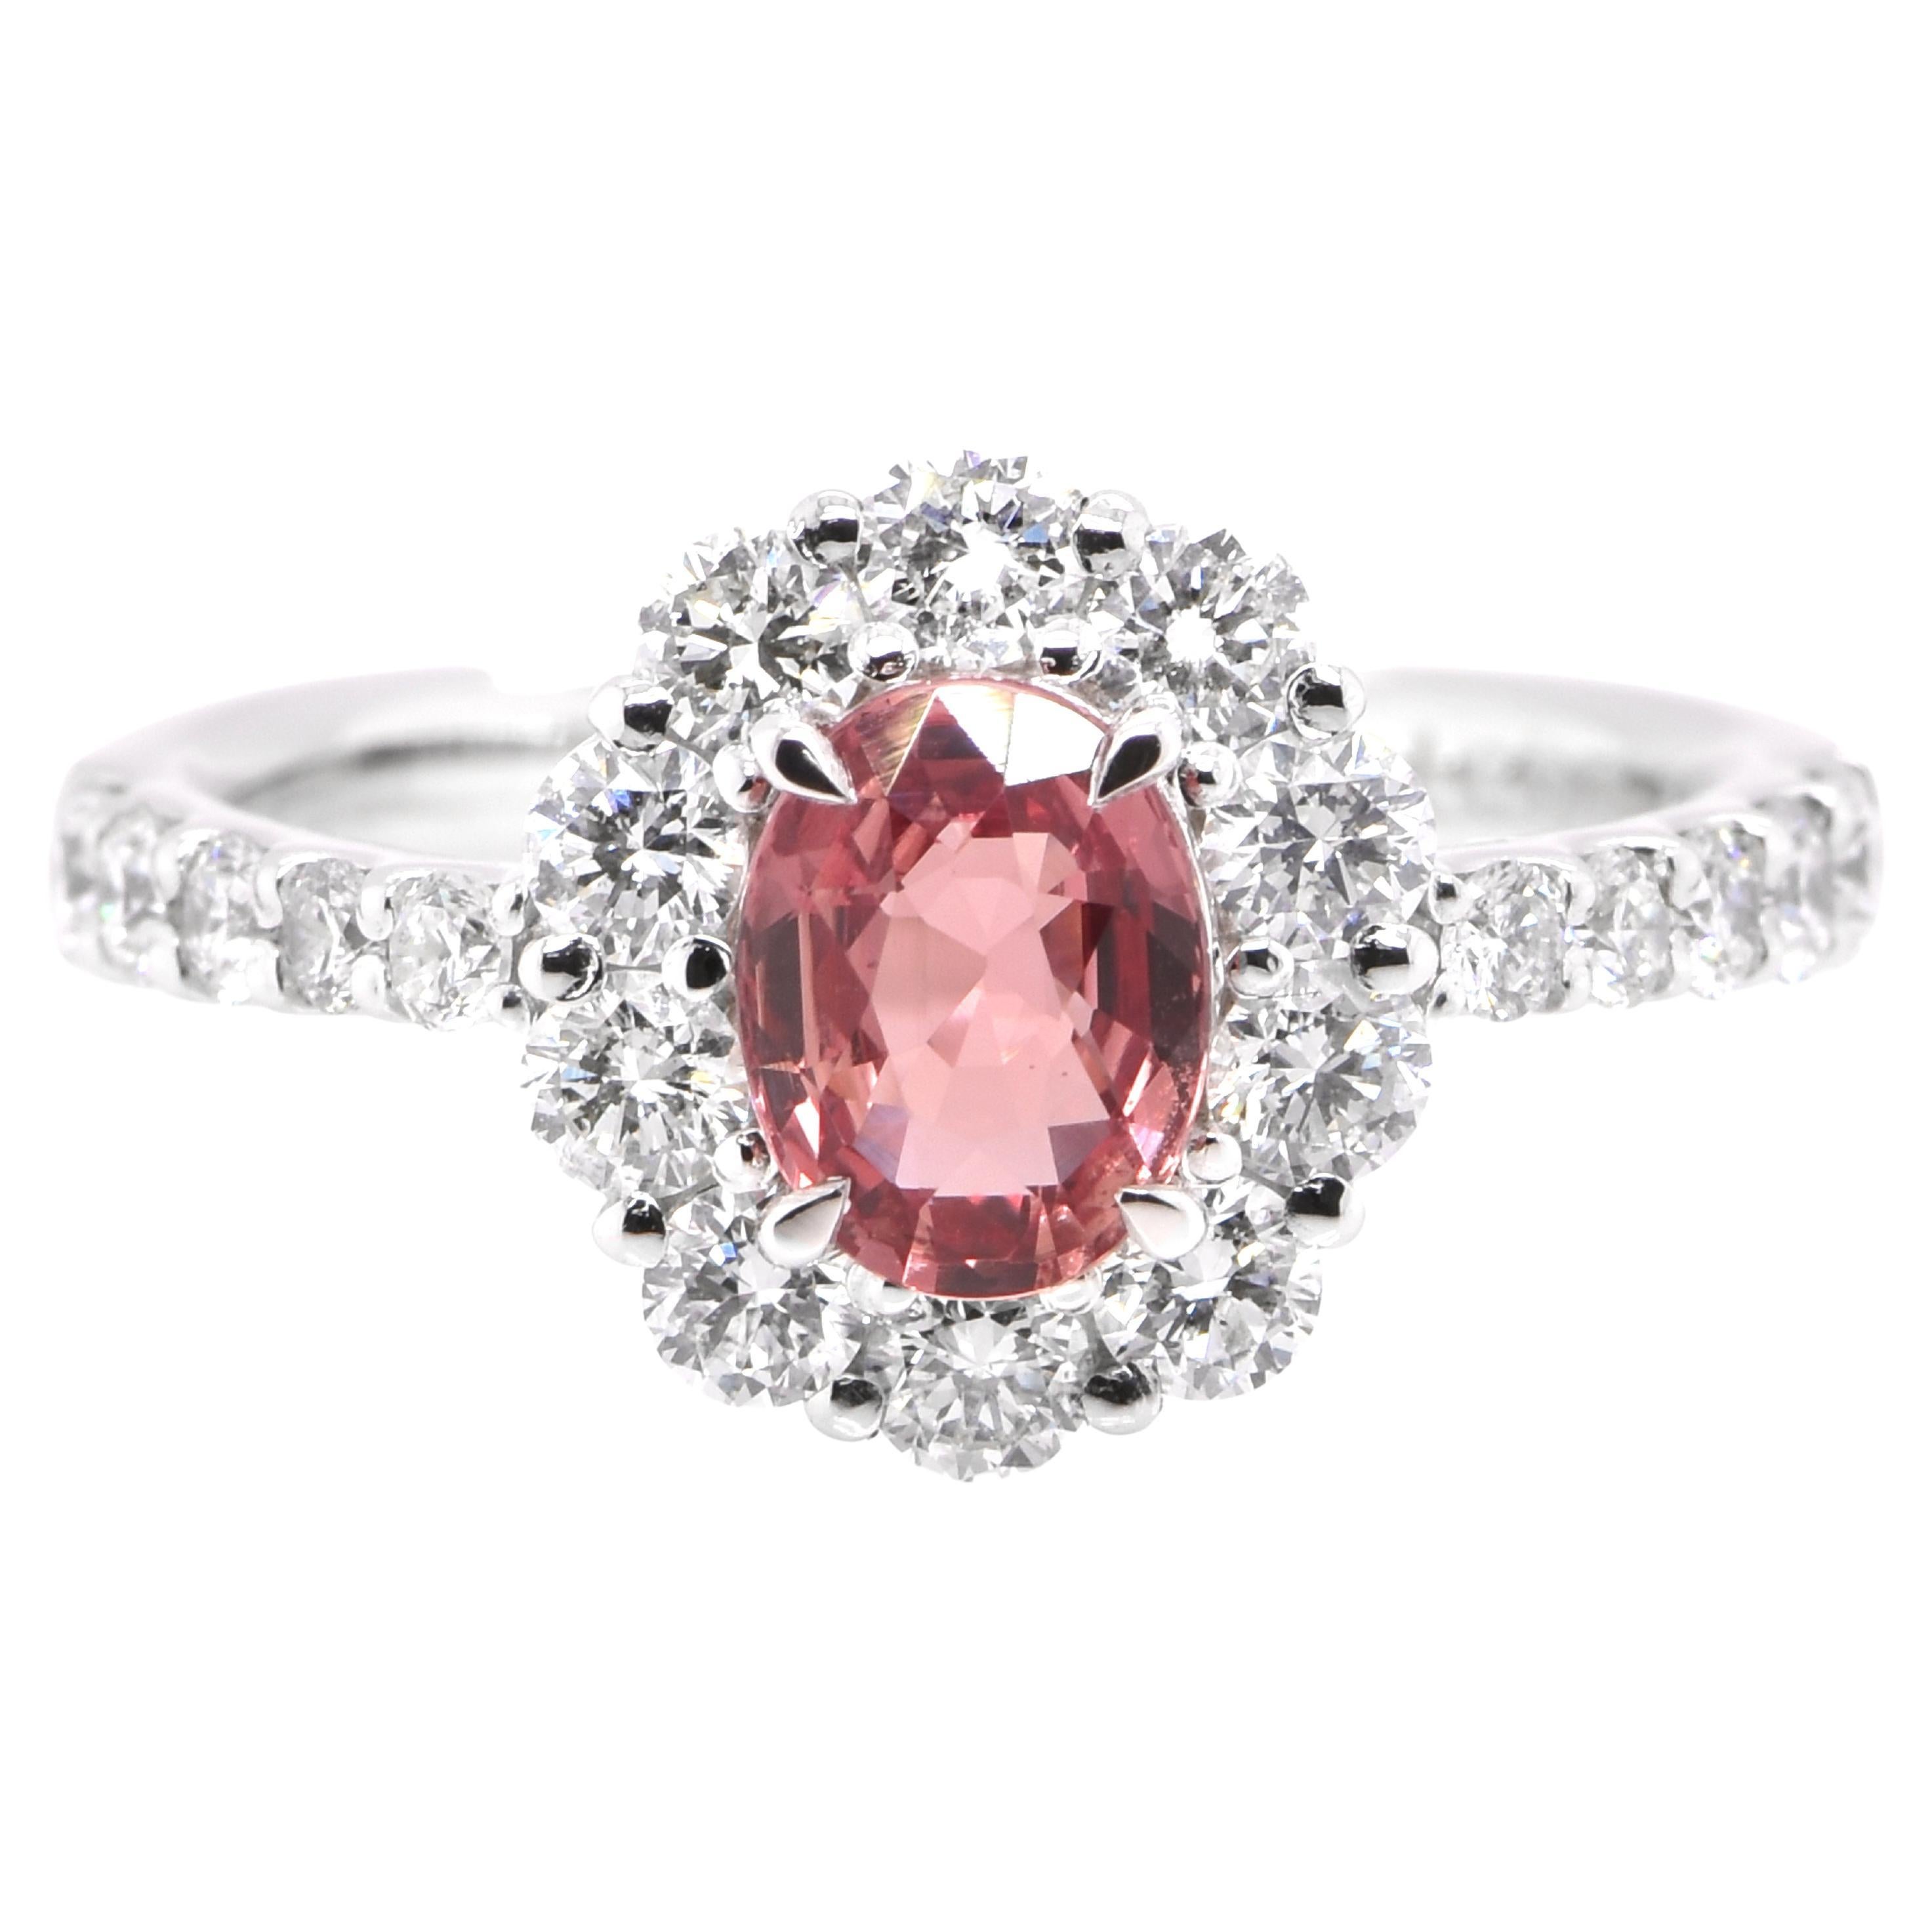 GIA Certified 1.02 Carat, Unheated Padparadscha Sapphire Ring set in Platinum For Sale